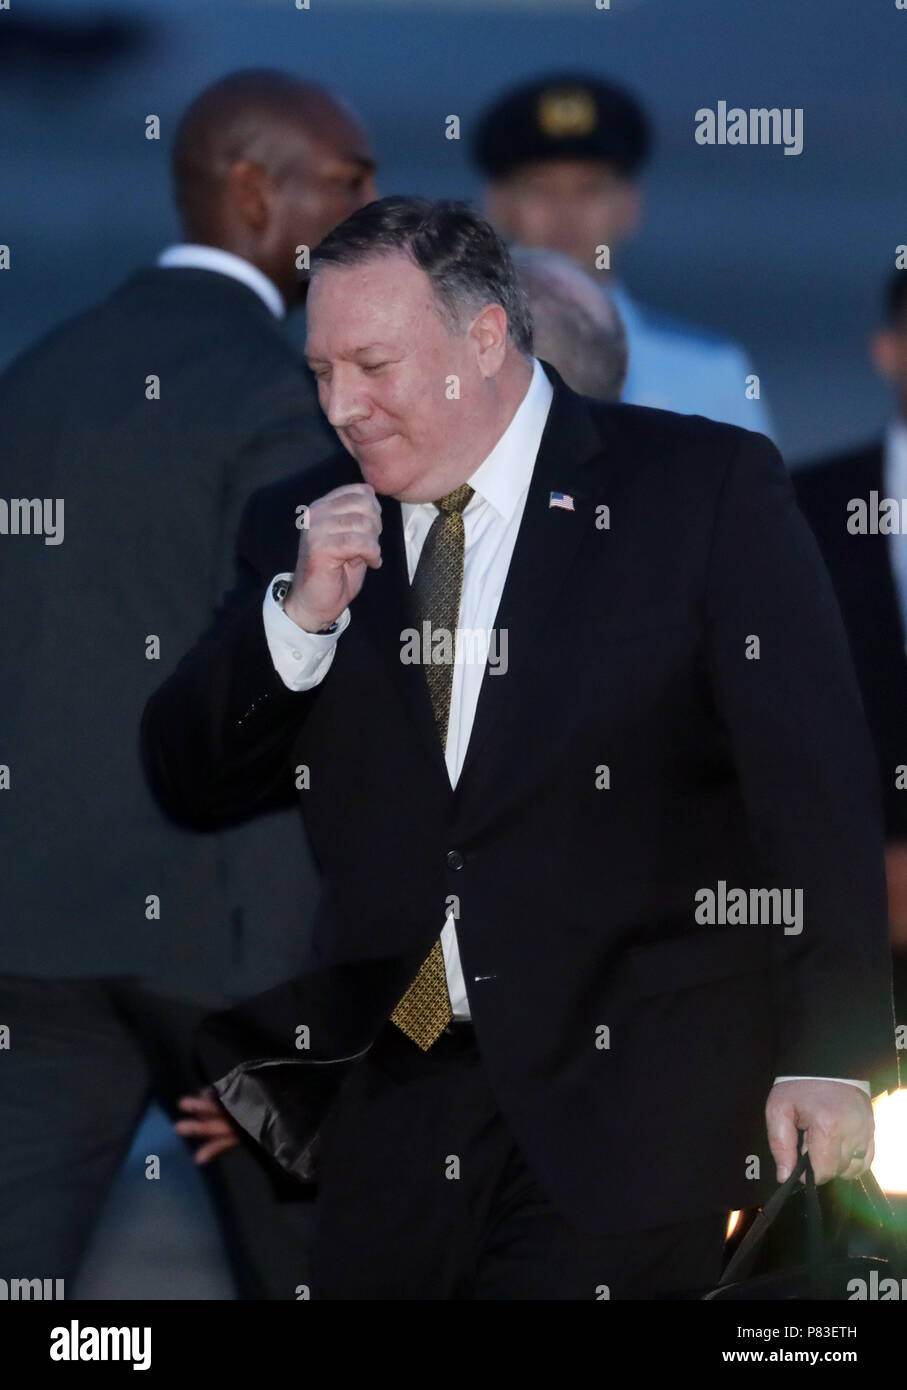 Tokyo, Japan. 7th July, 2018. United States Secretary of State Mike Pompeo arrives at the Tokyo International Airport from Pyongyang on Saturday, July 7, 2018. Pompeo spent a day in Pyongyang and will have meeting with Japanese and South Korean counterparts in Tokyo. Credit: Yoshio Tsunoda/AFLO/Alamy Live News Stock Photo